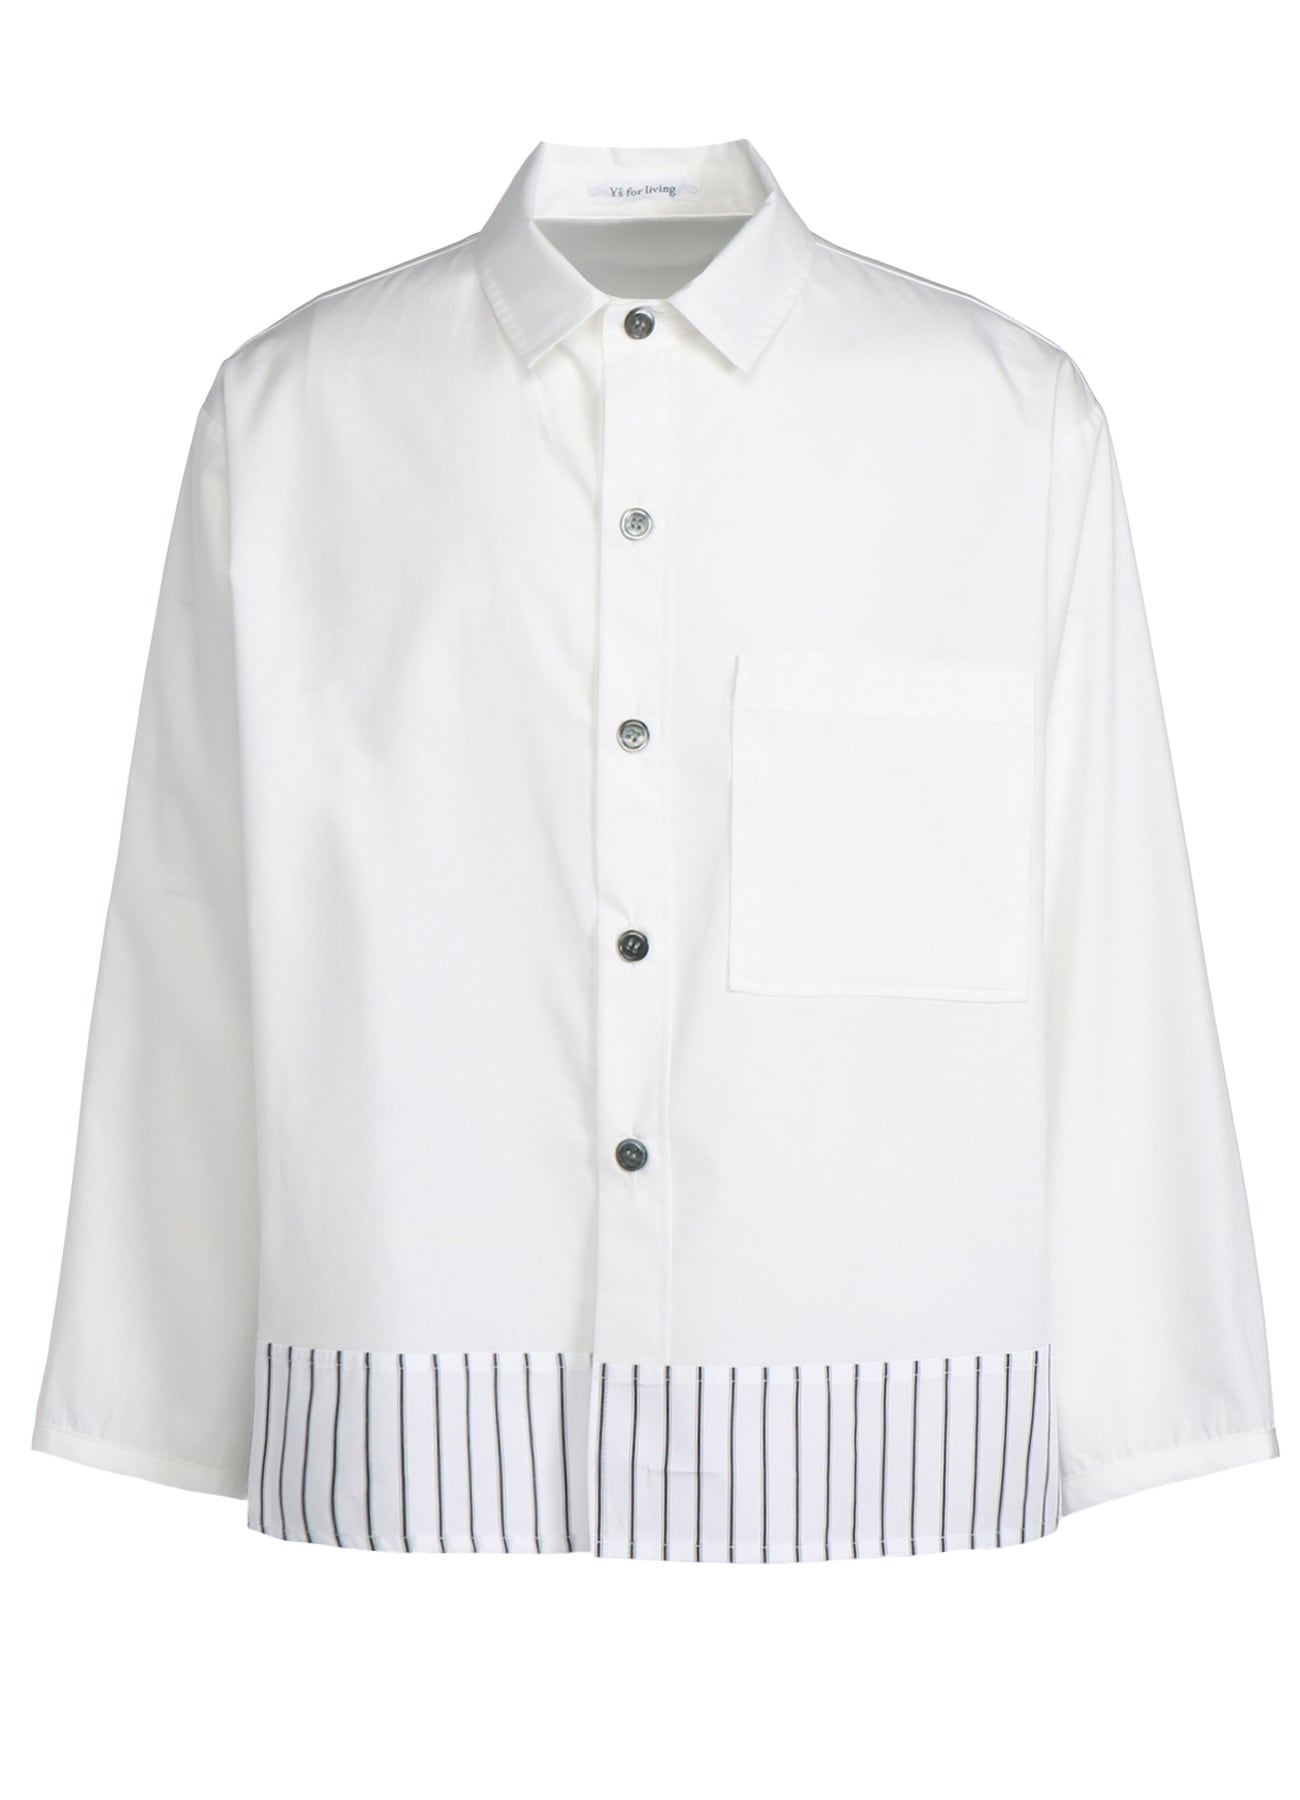 COTTON BROAD SHIRT (M)(M White x Stripe): Y's for living｜THE SHOP ...